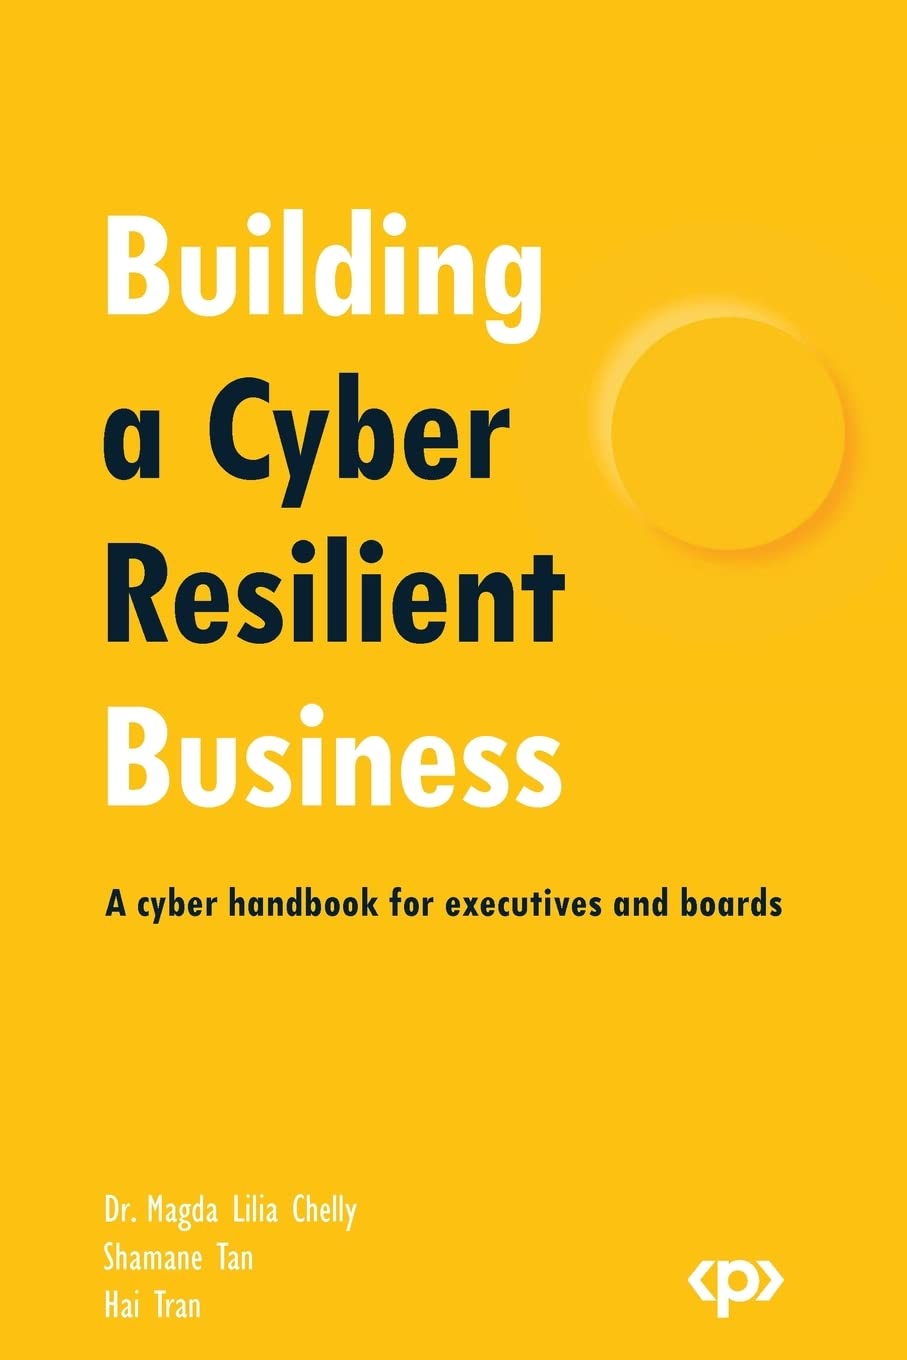 https://www.amazon.in/Building-Cyber-Resilient-Business-executives/dp/1803246480